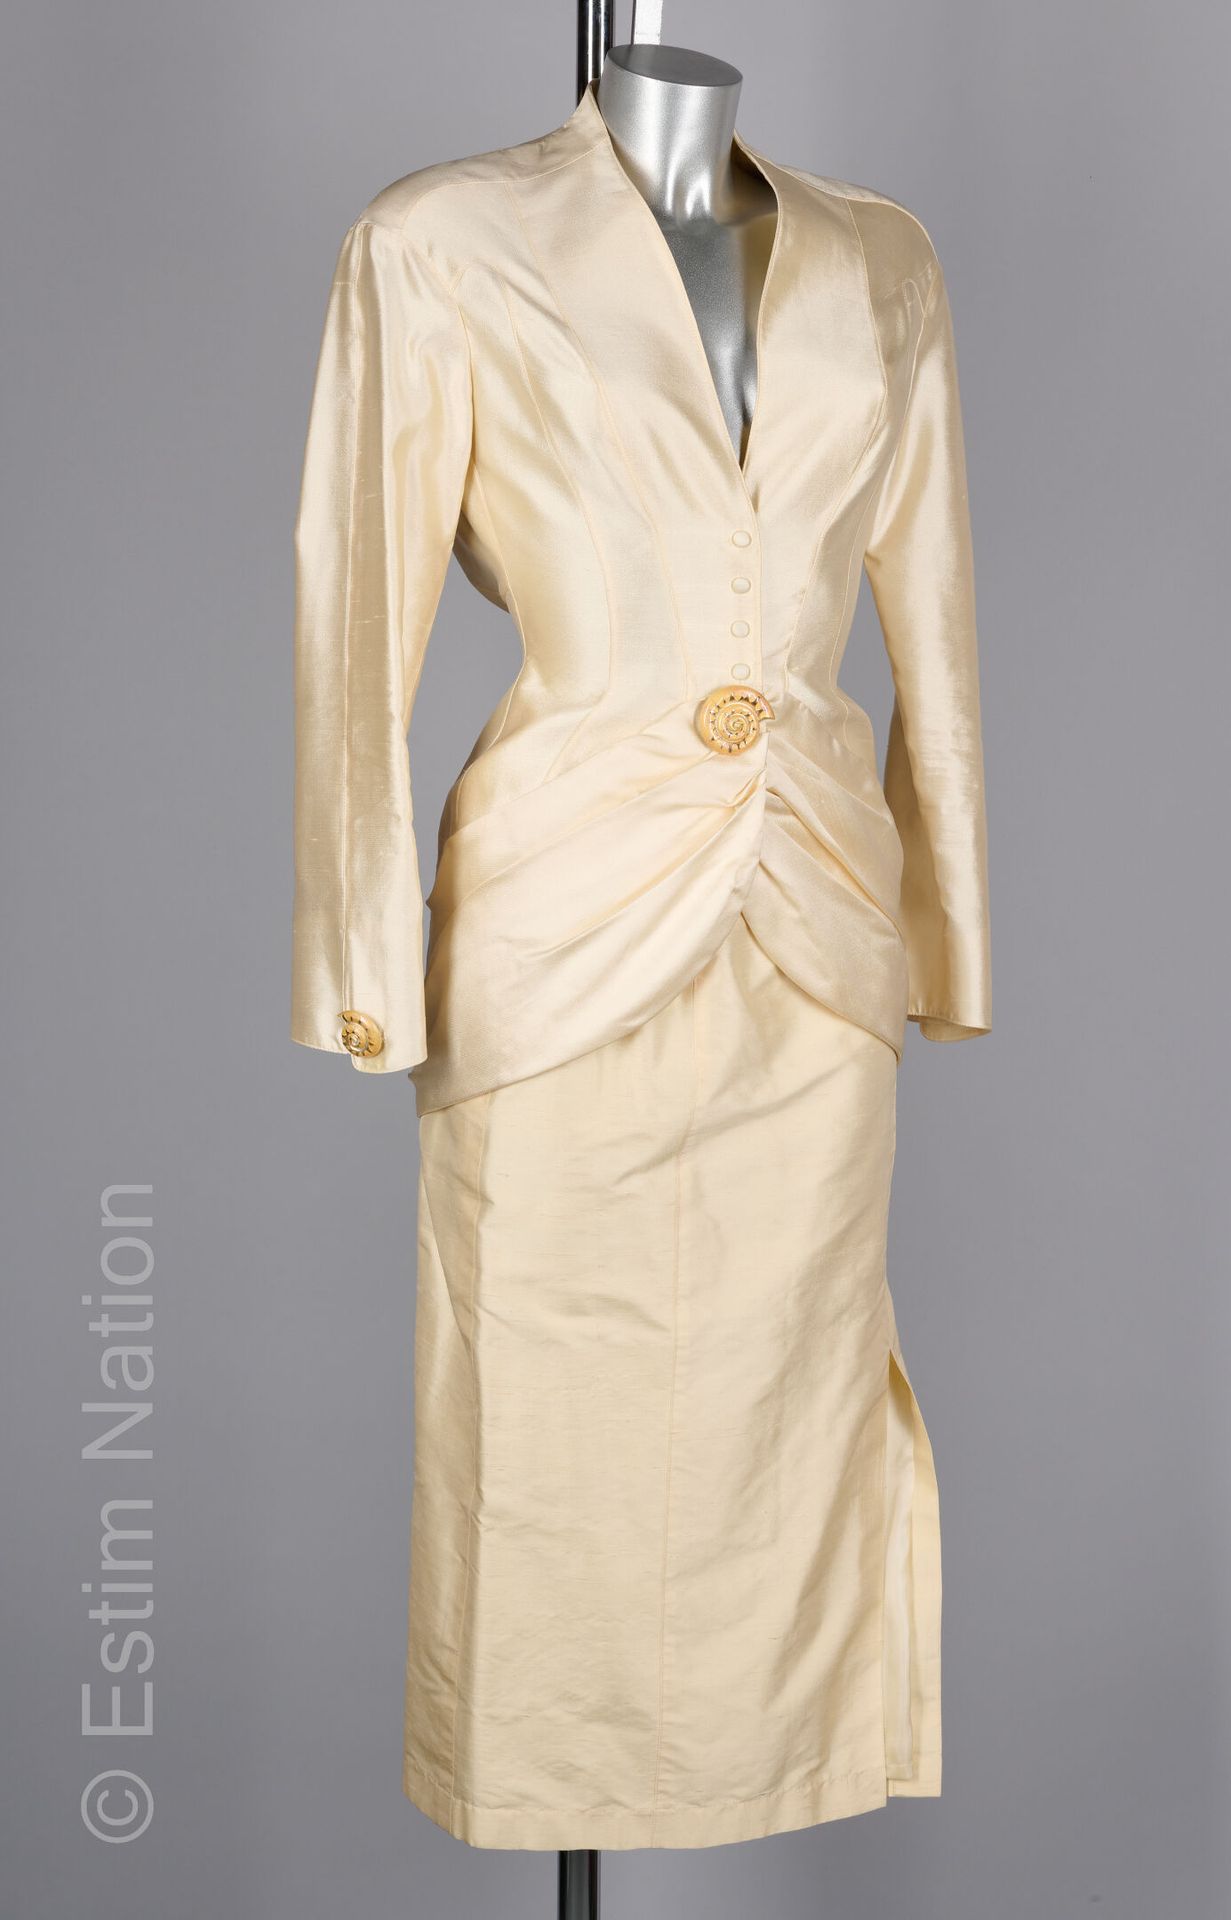 THIERRY MUGLER CIRCA 2000 ENSEMBLE in ivory raw silk, jacket with shapely cut-ou&hellip;